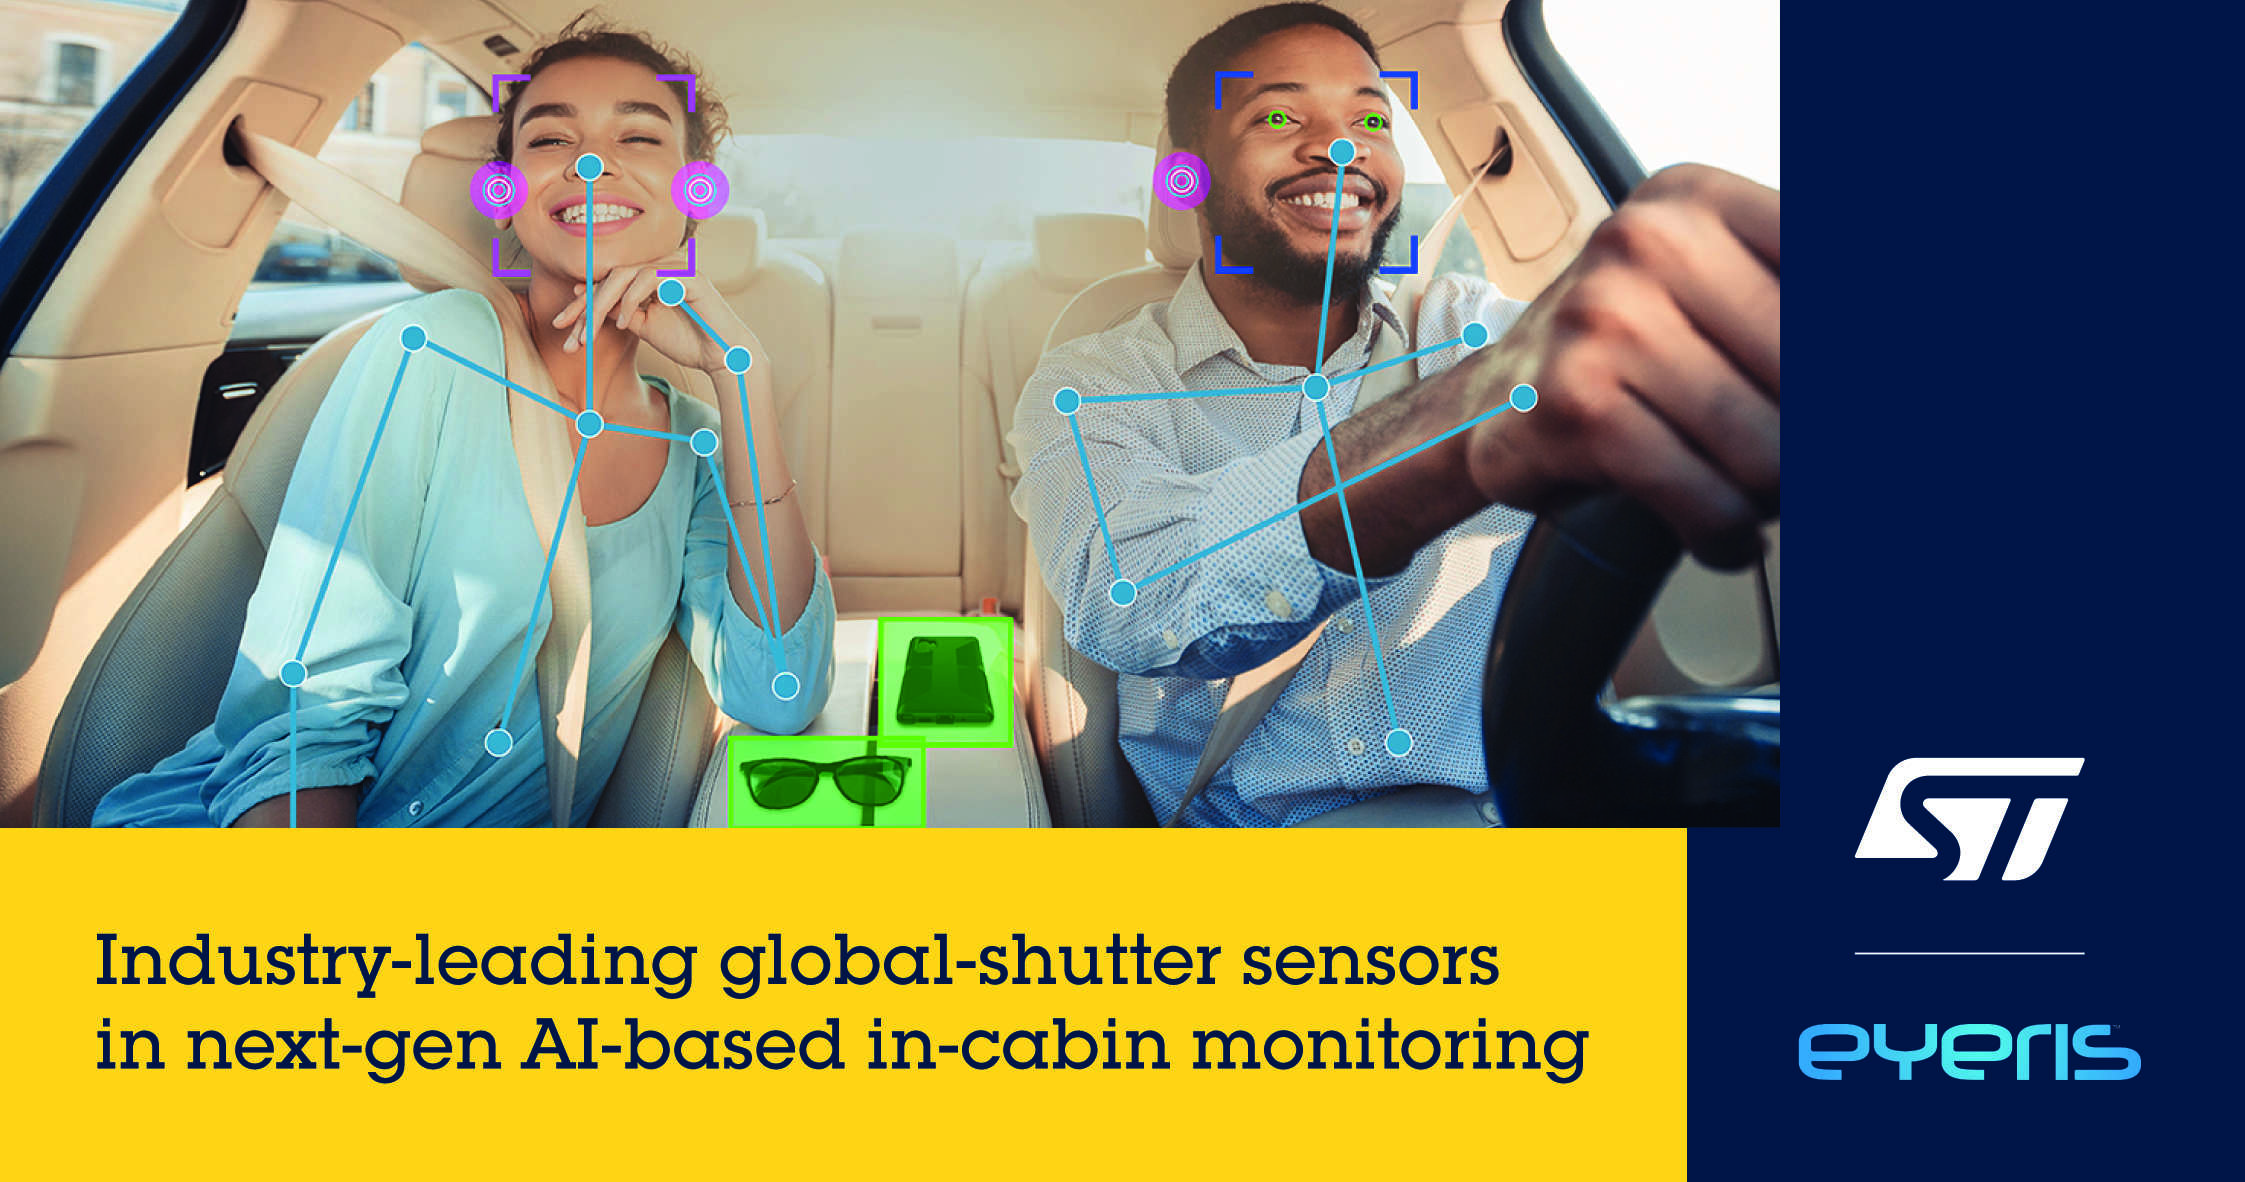 ST sensor will enable Eyeris for accurate child presence detection, and recognition of common vehicle interior objects under the widest range of lighting conditions.